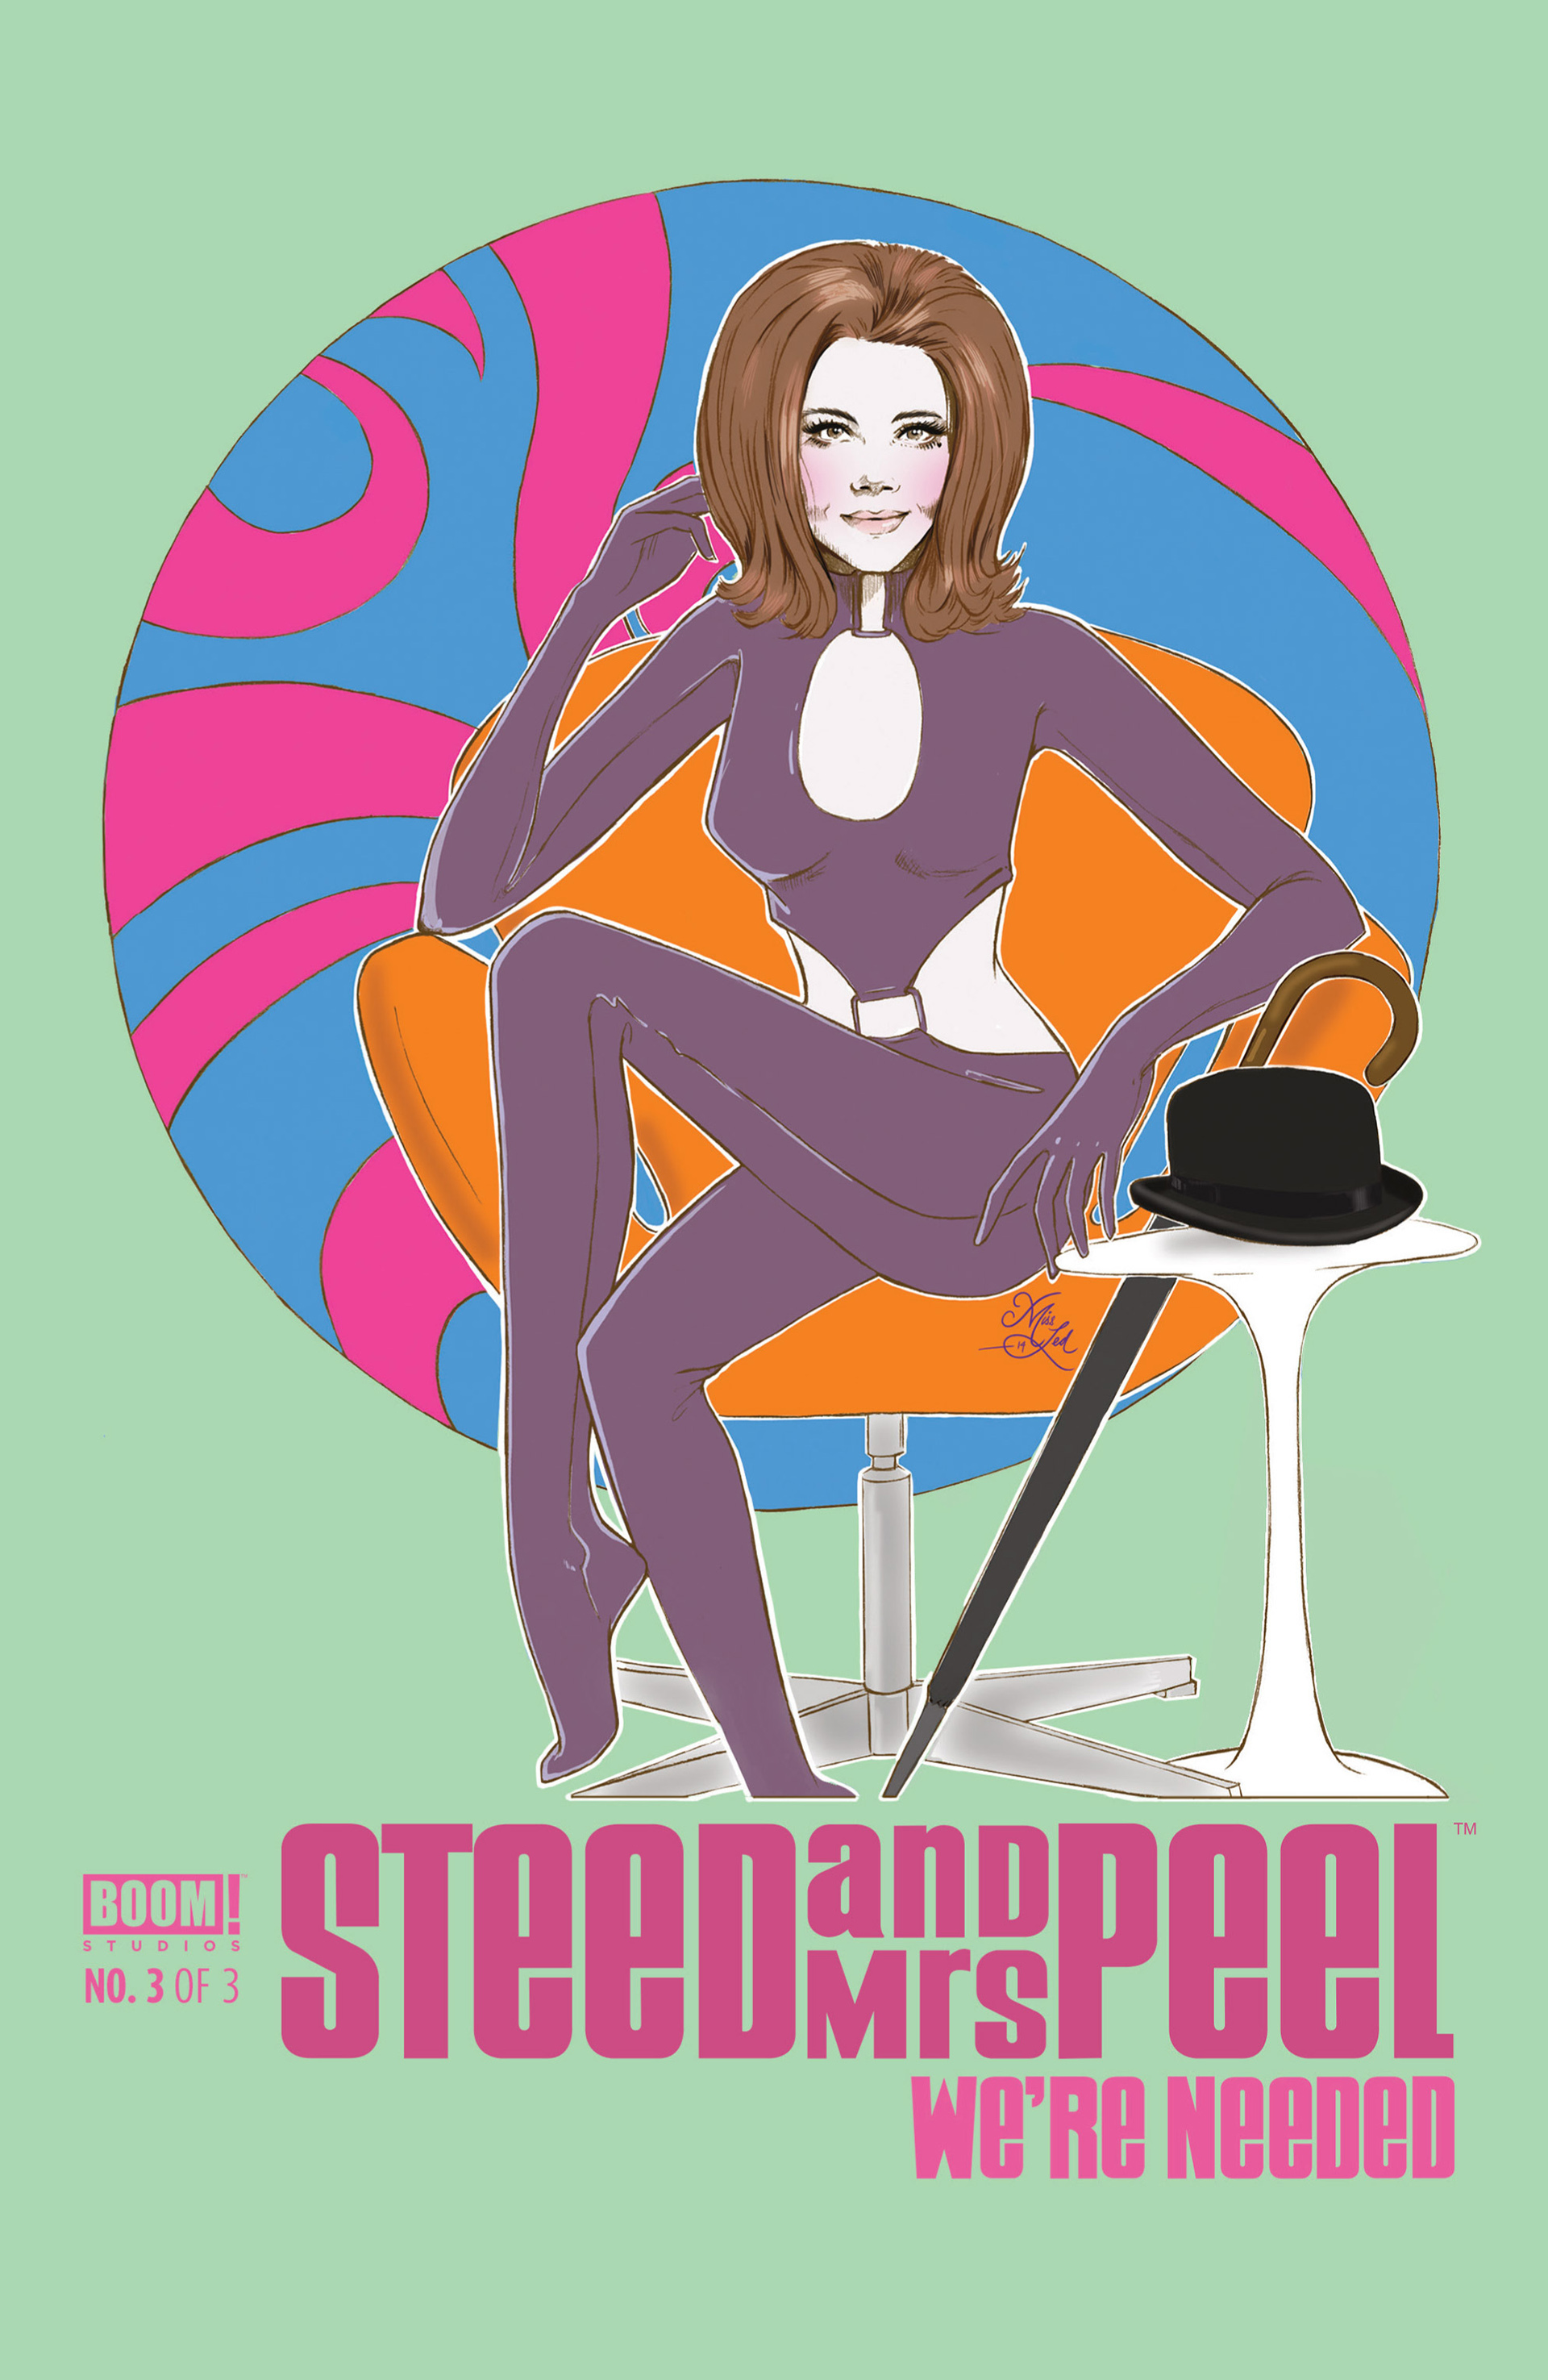 Read online Steed and Mrs. Peel: We're Needed comic -  Issue #3 - 1